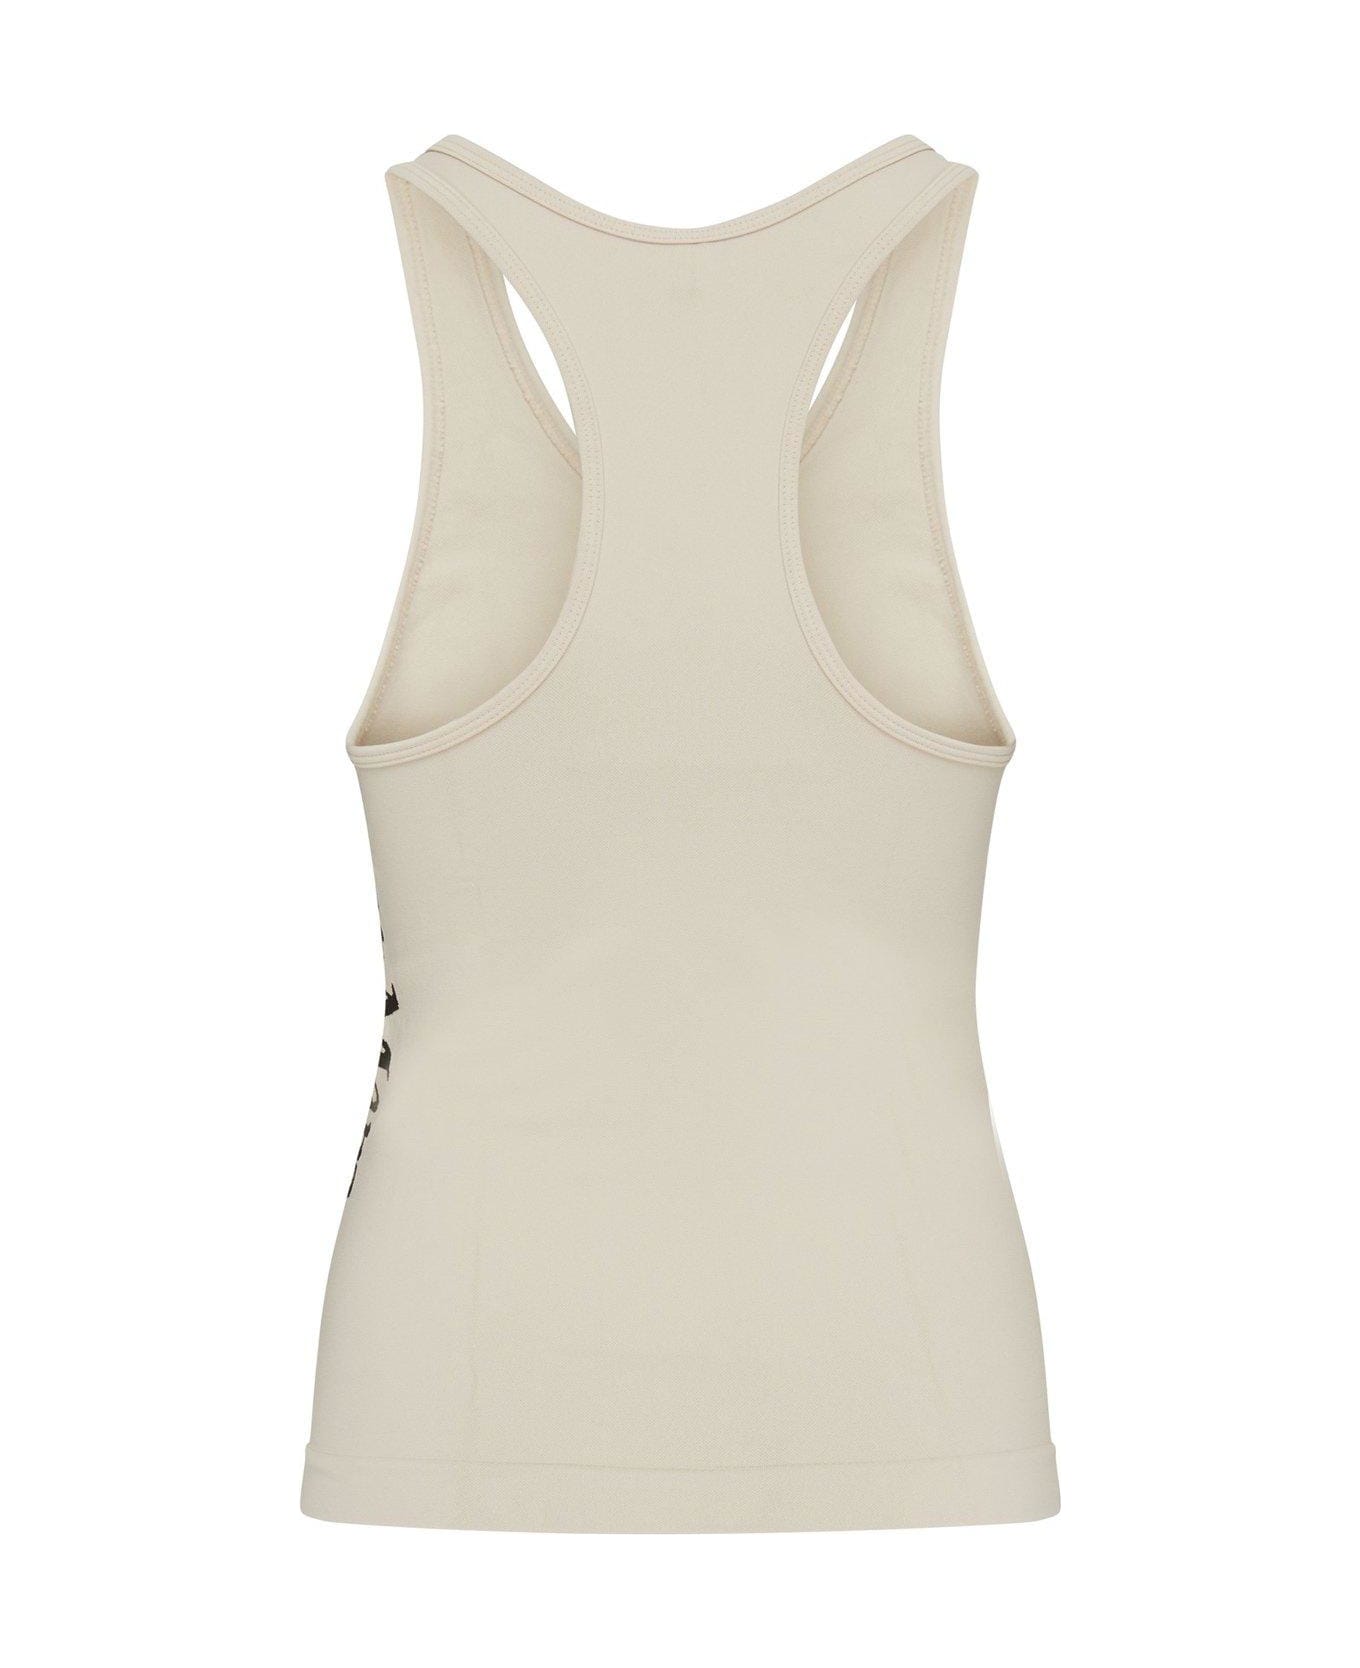 'S Max Mara Logo Detailed Stretched Tank Top - WHITE